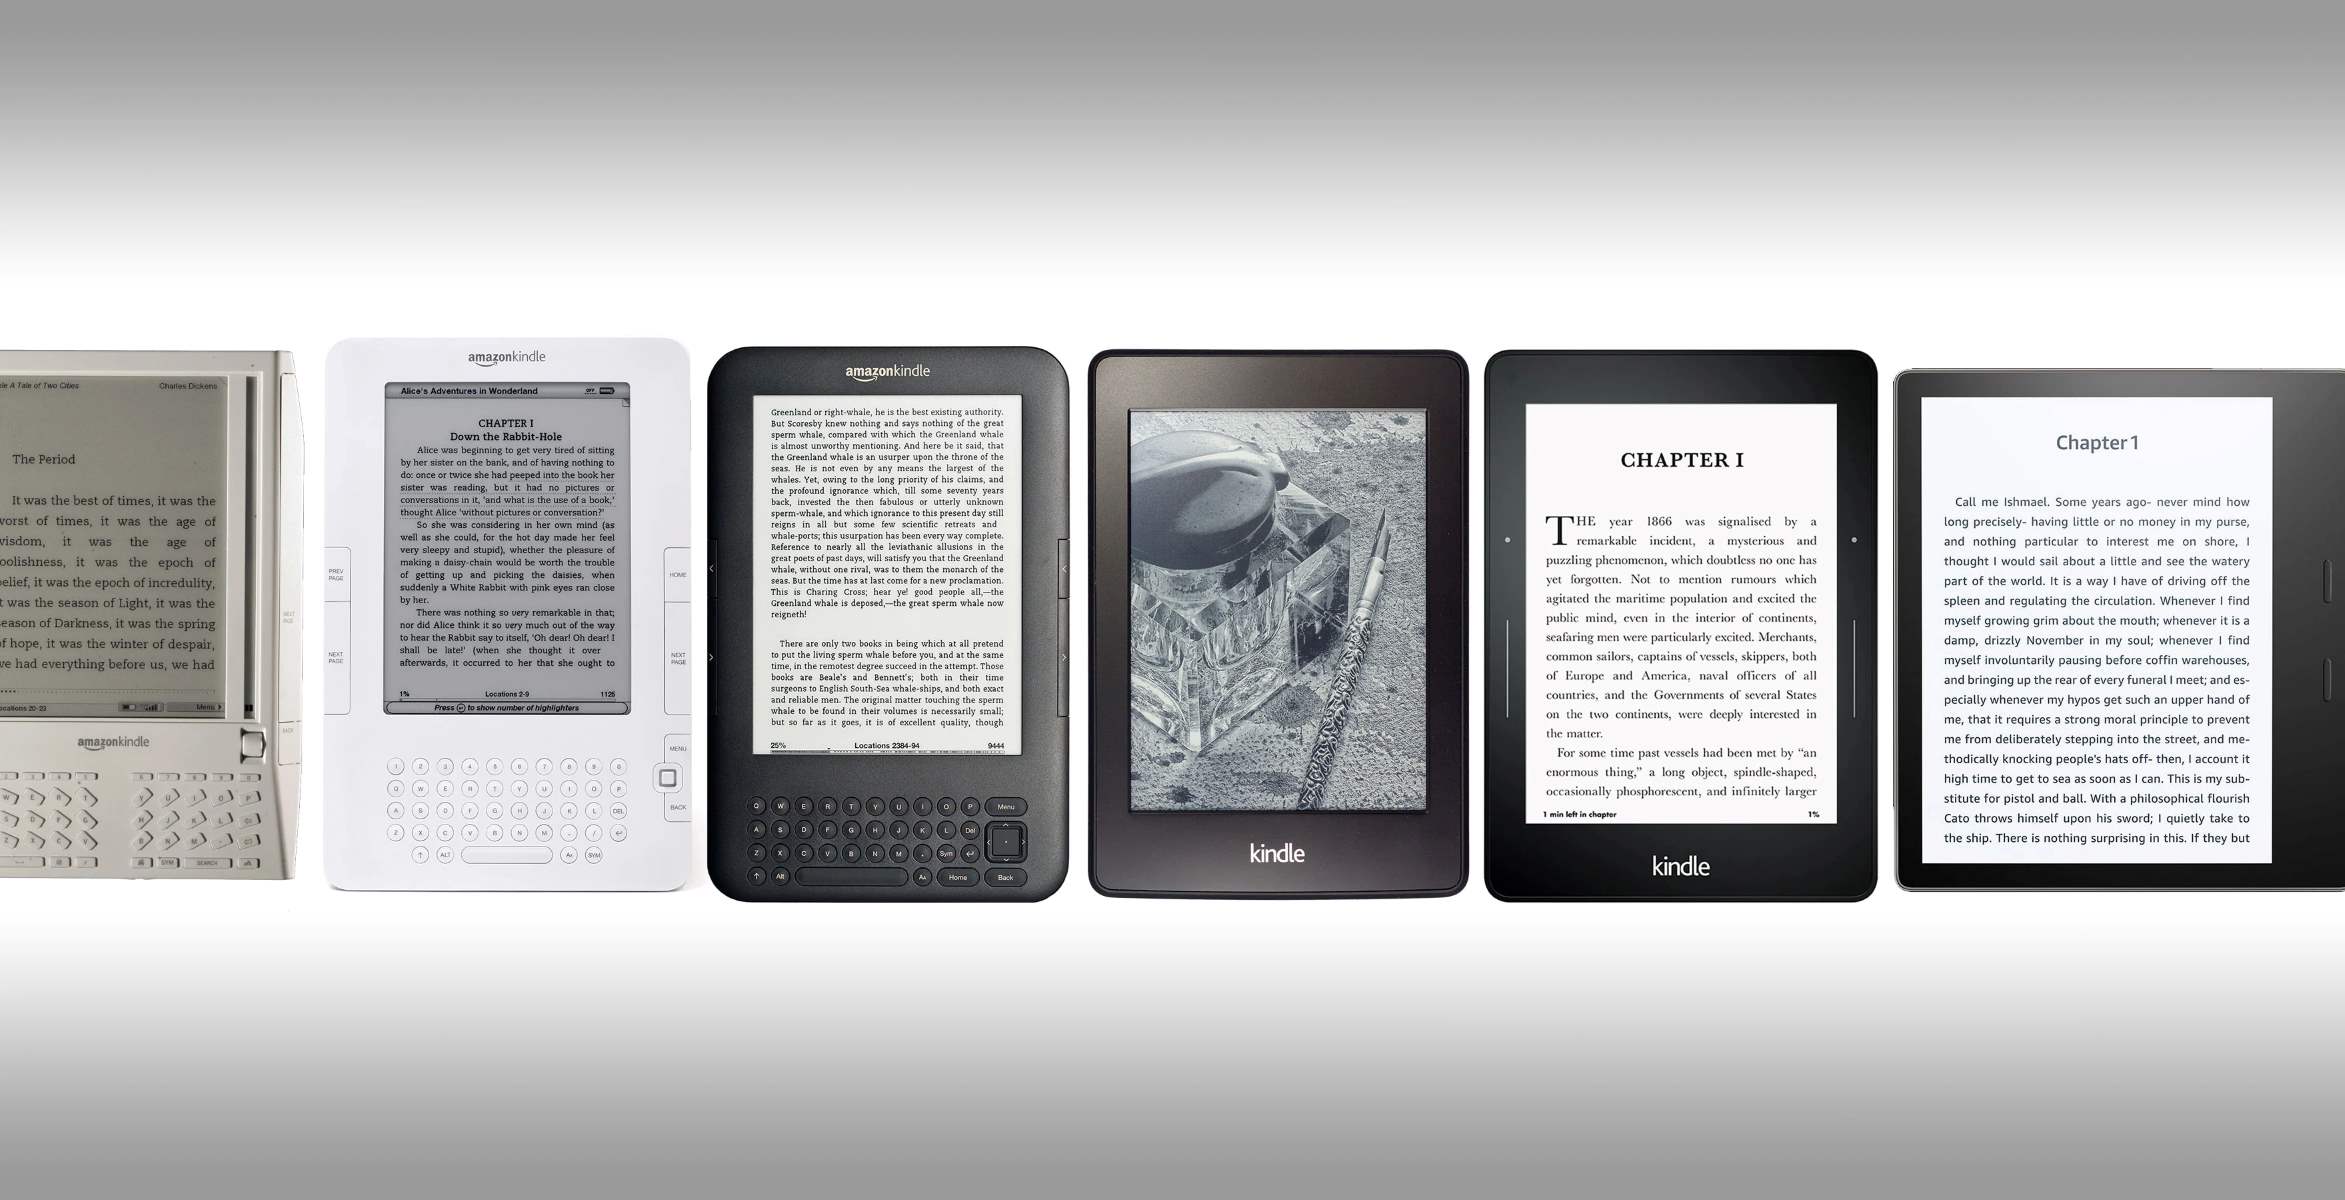 Who Invented The Kindle Device